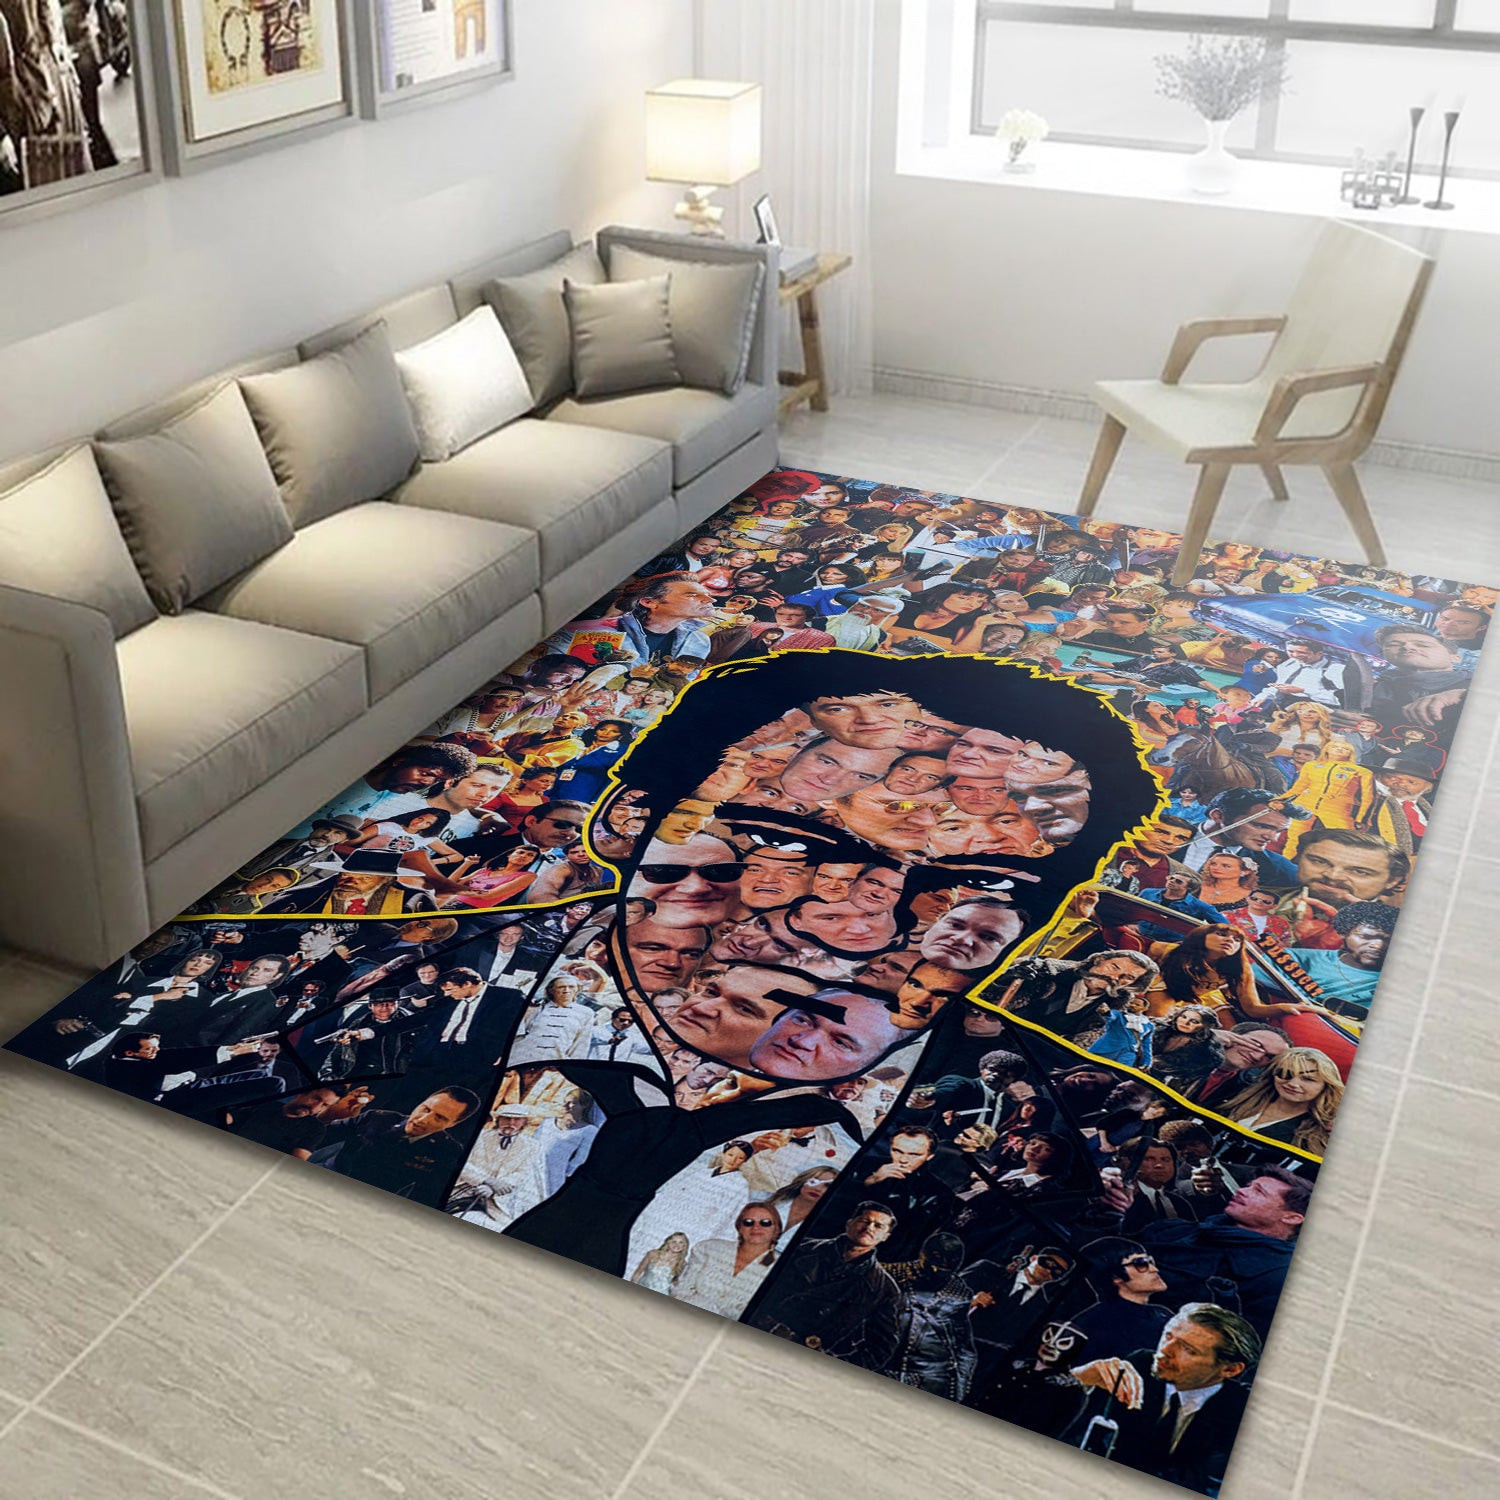 Quentin Tarantino Movie Area Rug, Living Room And Bedroom Rug - Home Decor - Indoor Outdoor Rugs